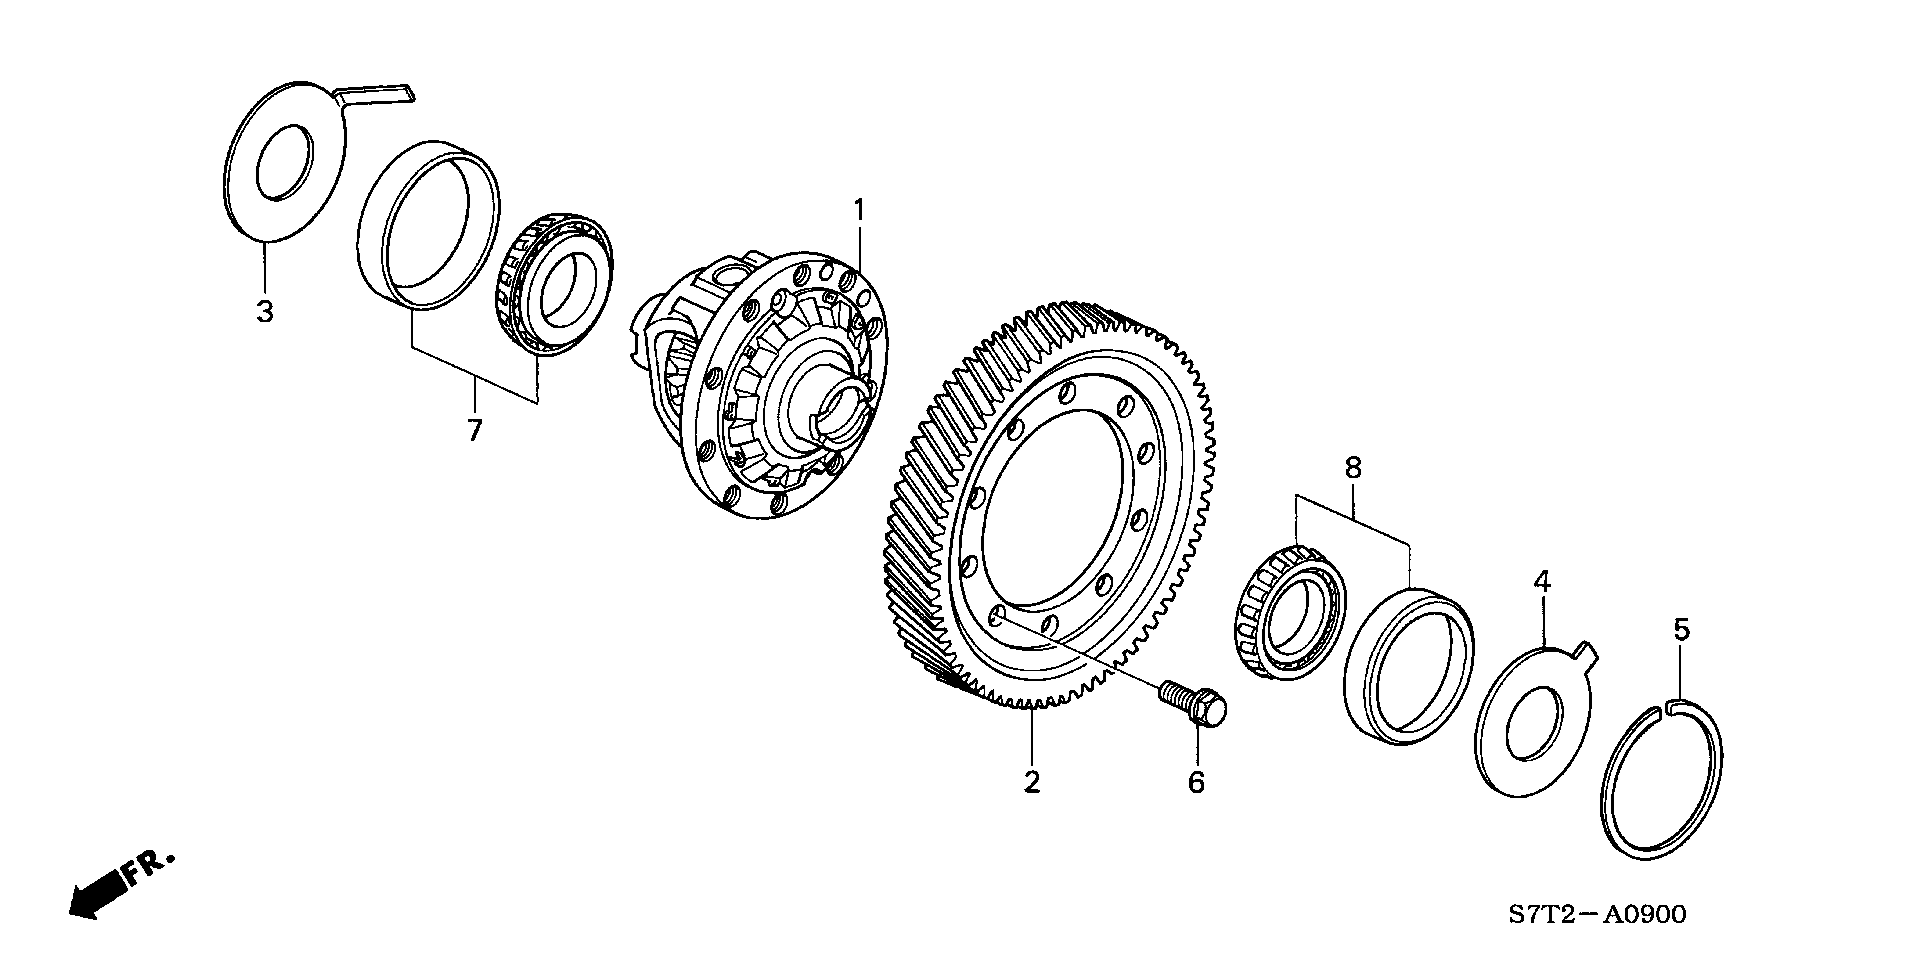 DIFFERENTIAL(2WD) (4AT)